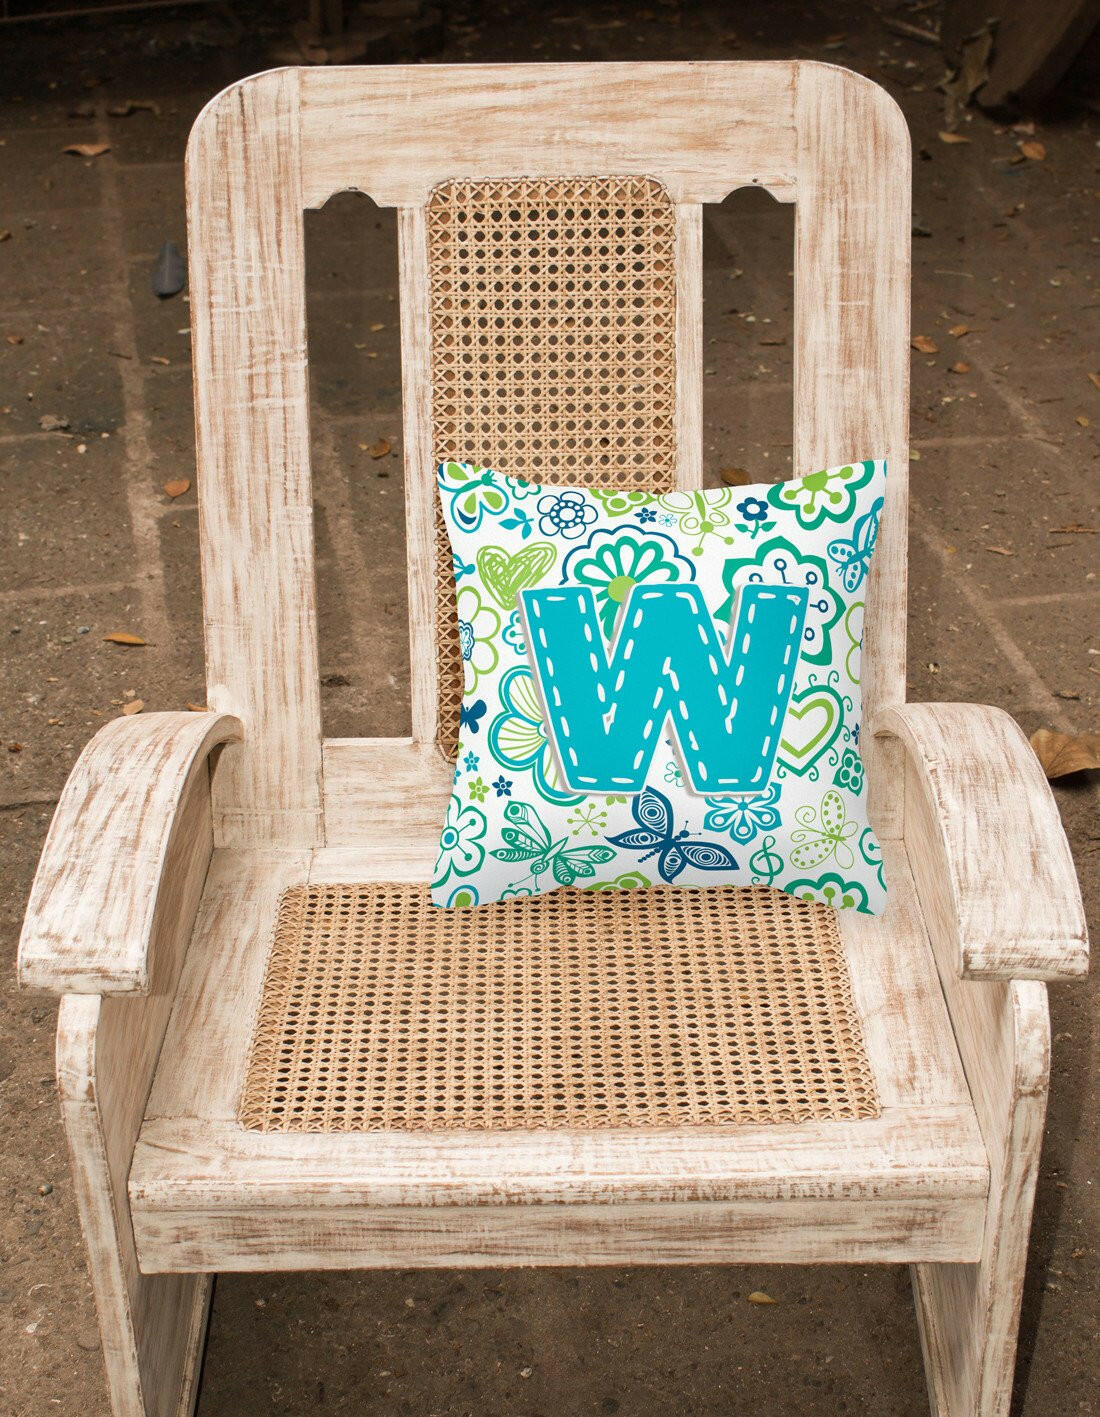 Letter W Flowers and Butterflies Teal Blue Canvas Fabric Decorative Pillow CJ2006-WPW1414 by Caroline's Treasures